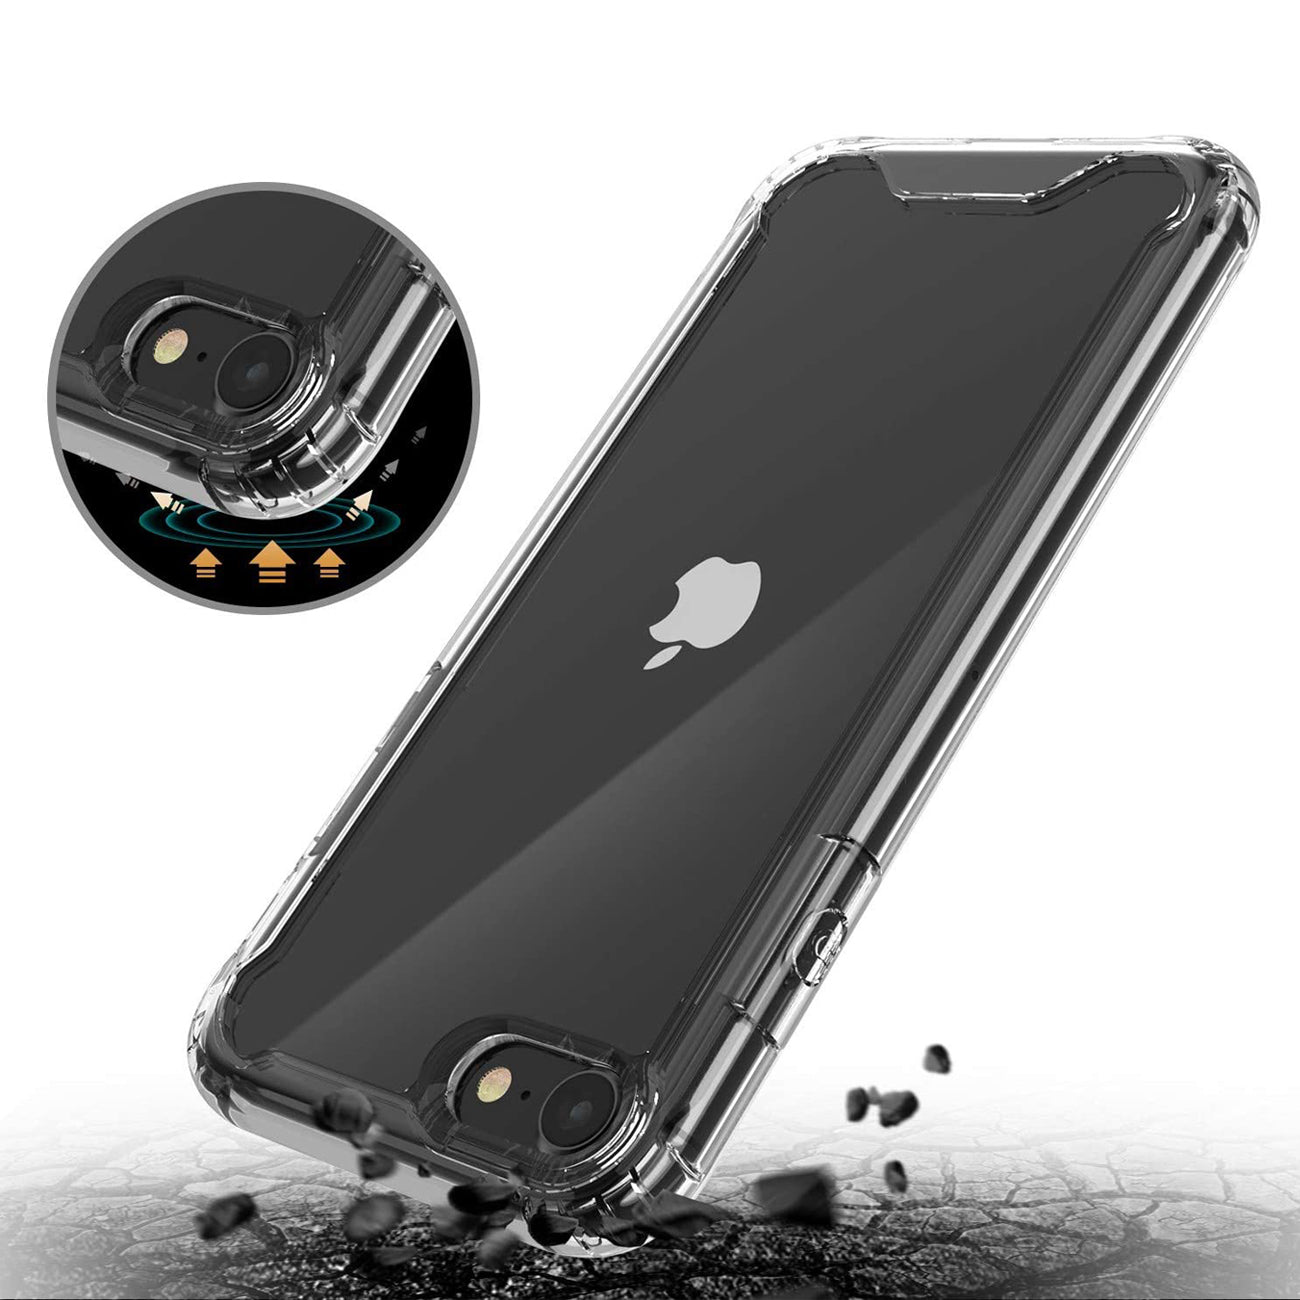 Case Bumper PC And TPU High Quality 2X Clean For iPhone SE2/ iPhone 8/ iPhone 7 Clear